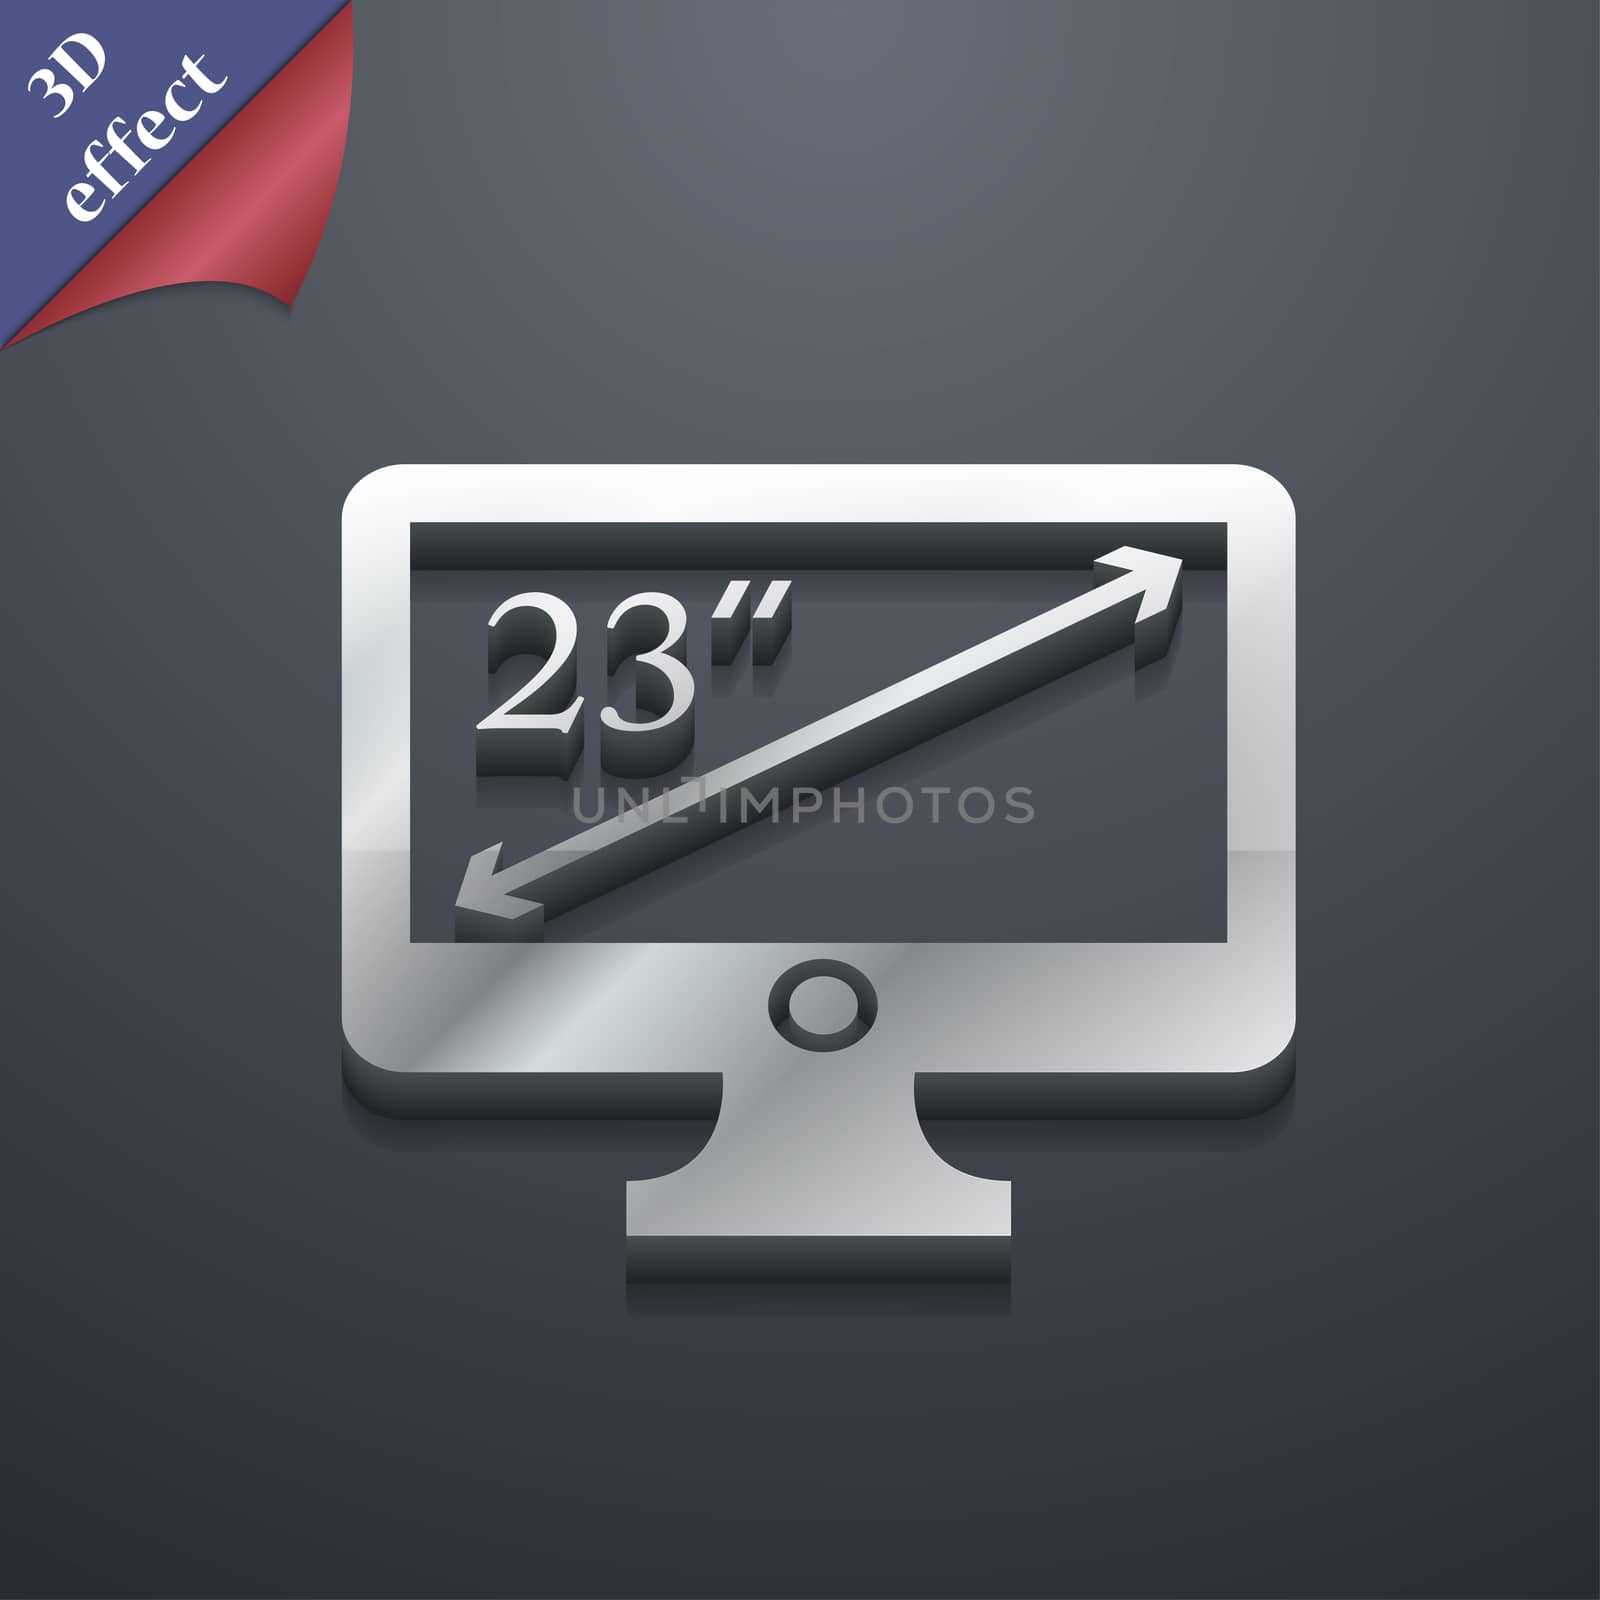 diagonal of the monitor 23 inches icon symbol. 3D style. Trendy, modern design with space for your text illustration. Rastrized copy